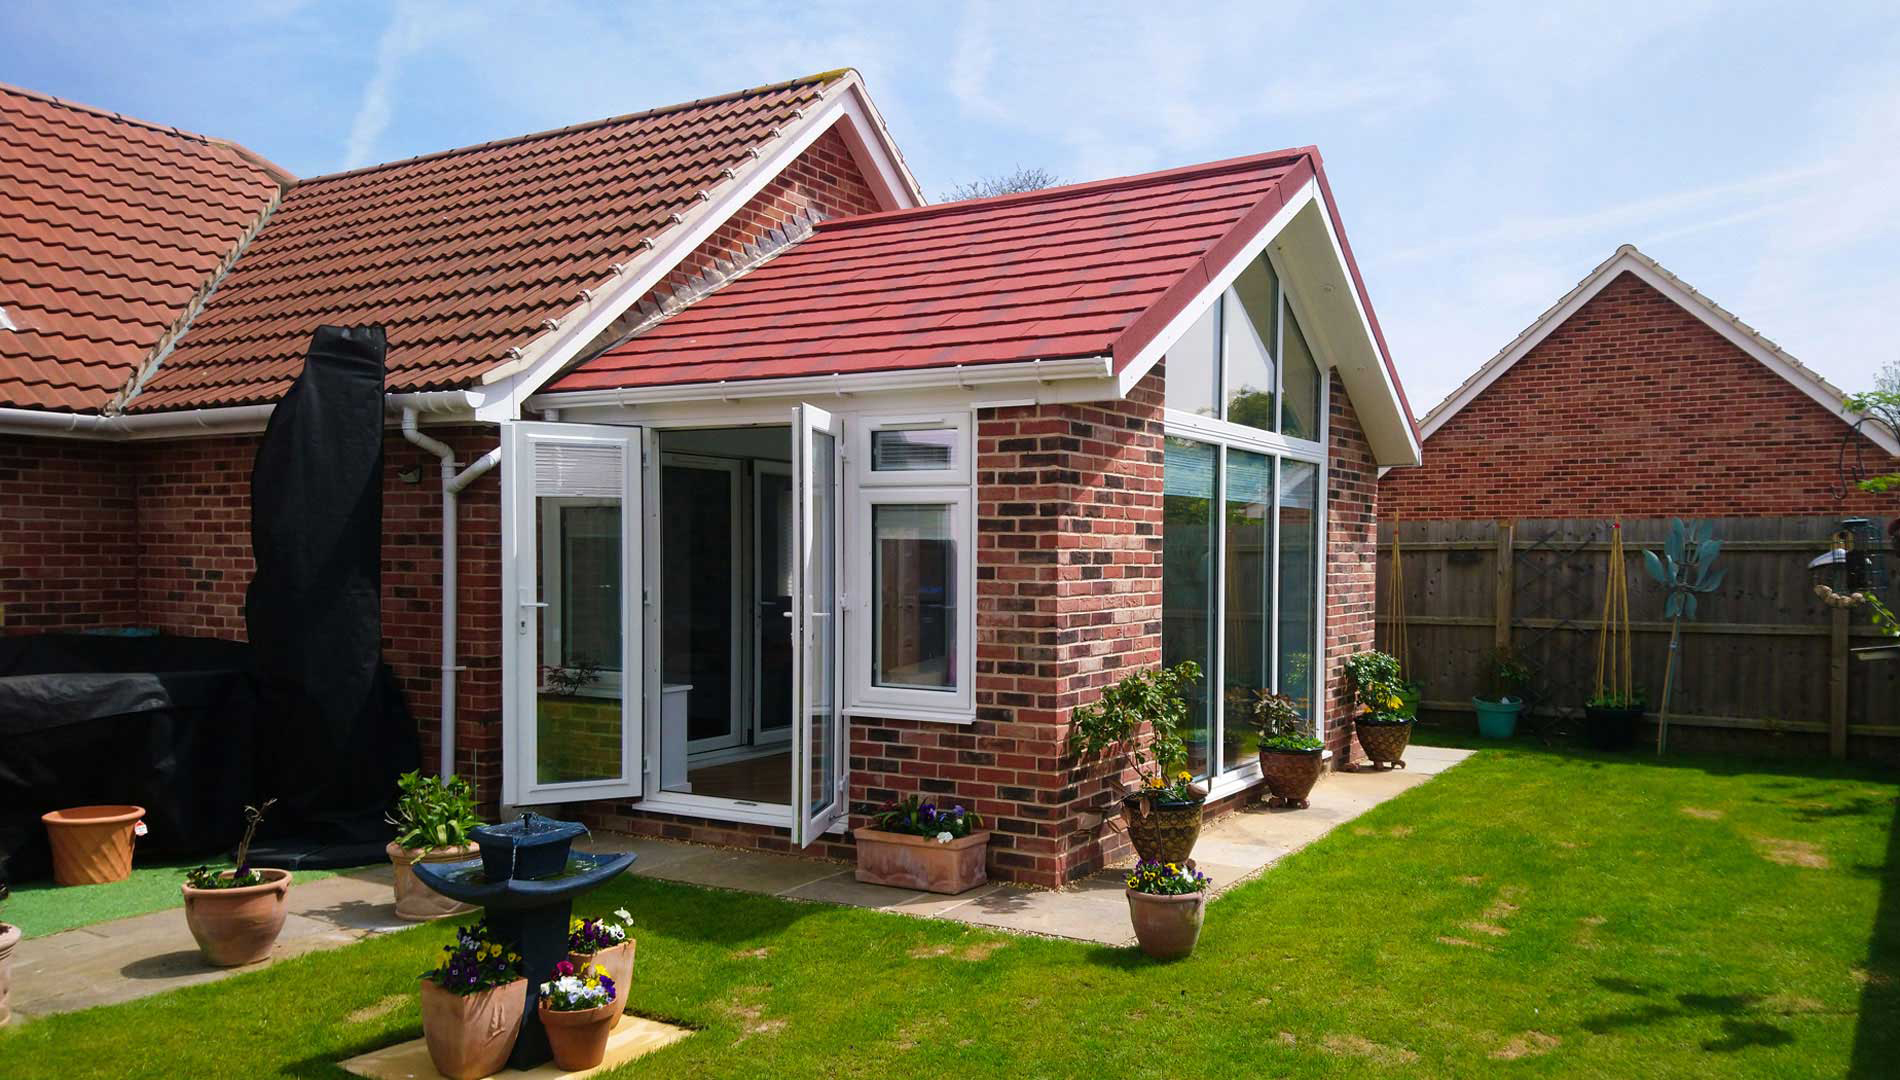 Georgian Gable Conservatory extension with solid tile roof